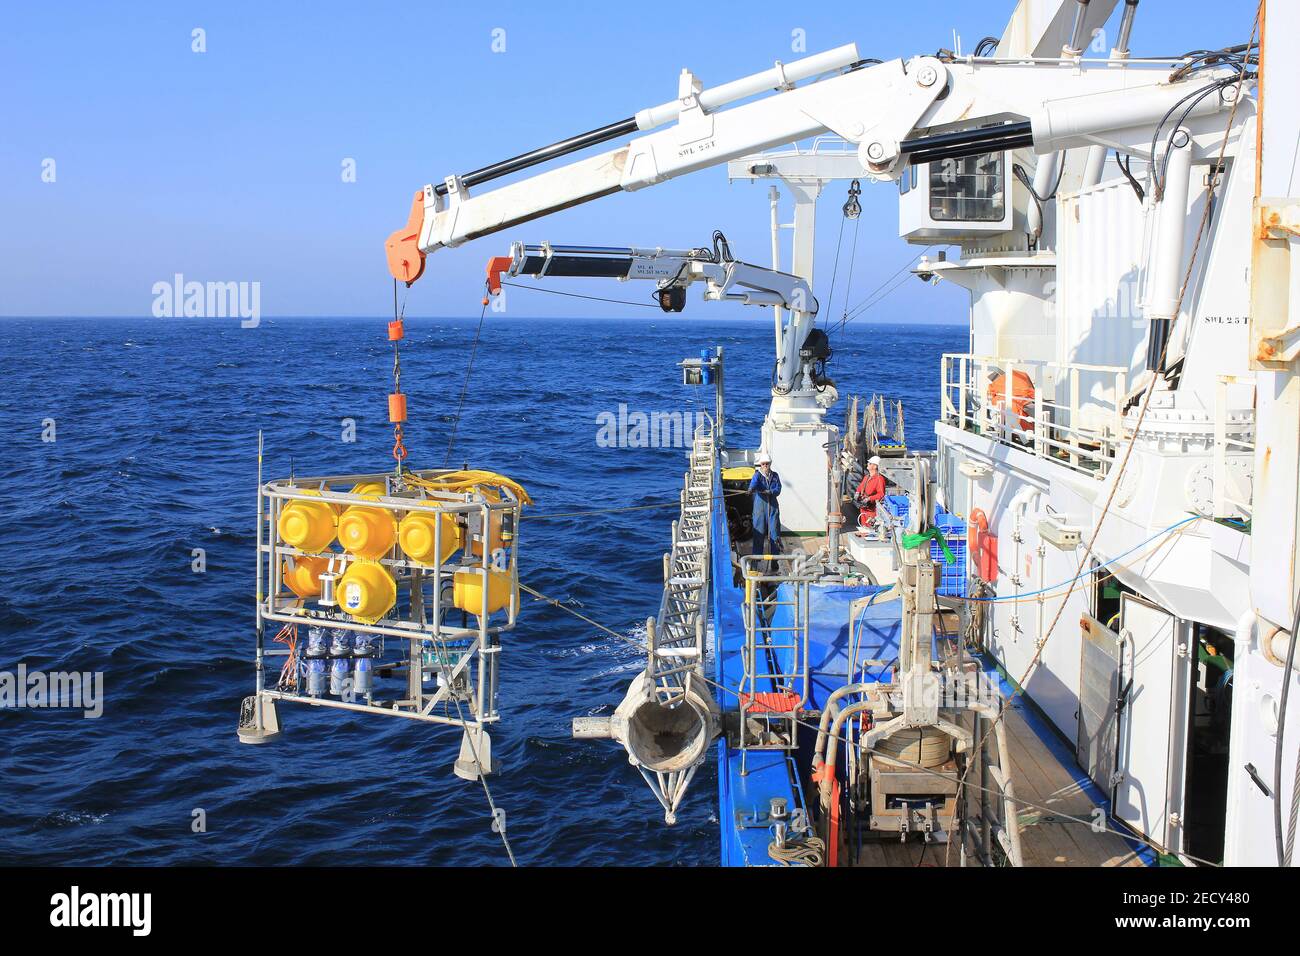 Deploying an ALBEX lander that can descend to the seafloor with equipment to measure current direction and speed, dissolved oxygen etc. Stock Photo